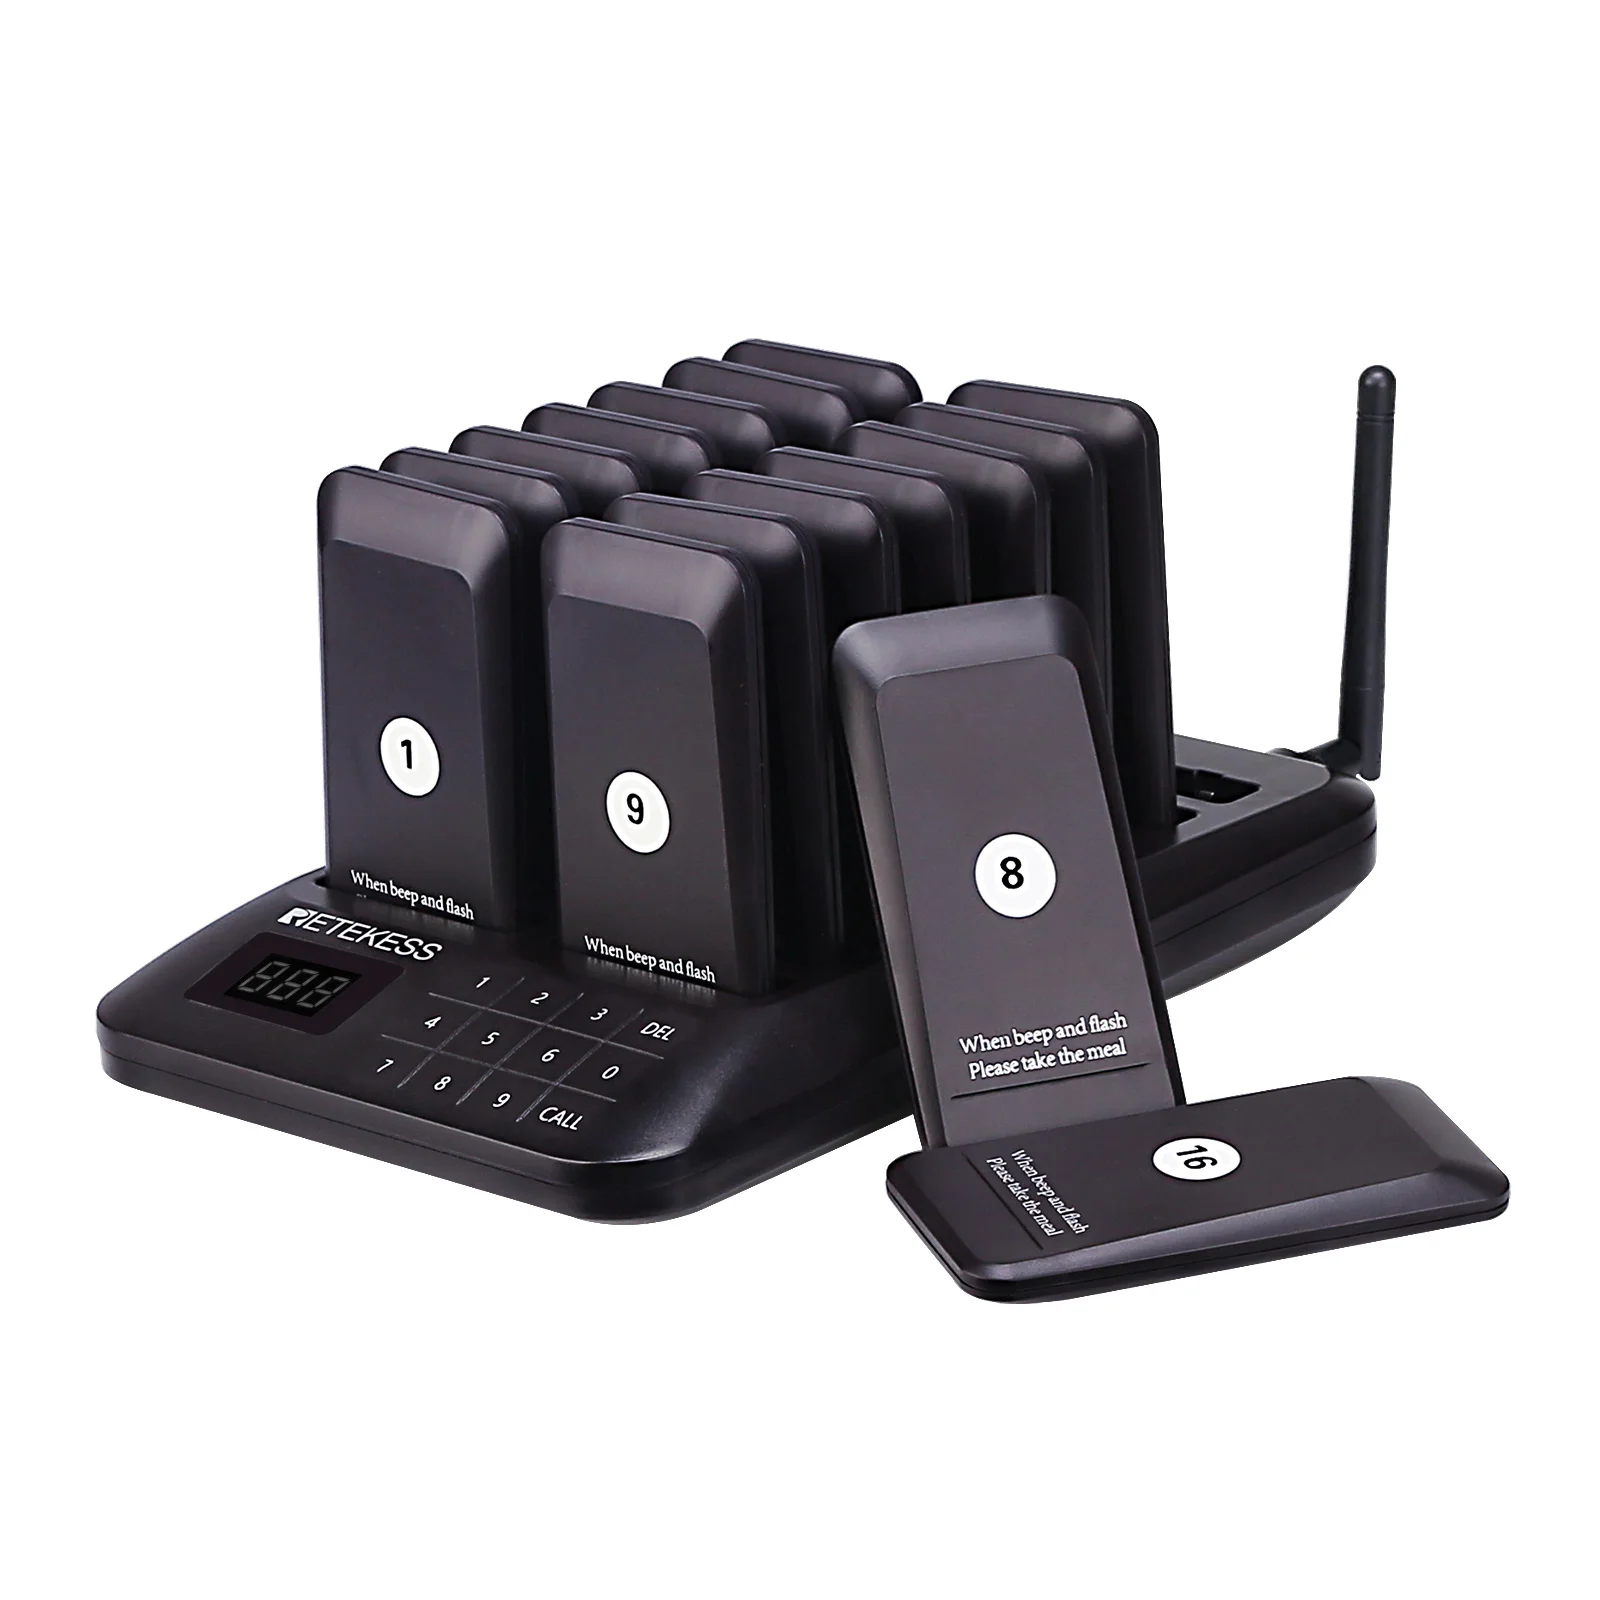 Details about   Restaurant Wireless Guest Paging Queuing Calling System Transmitter+10*Pagers 